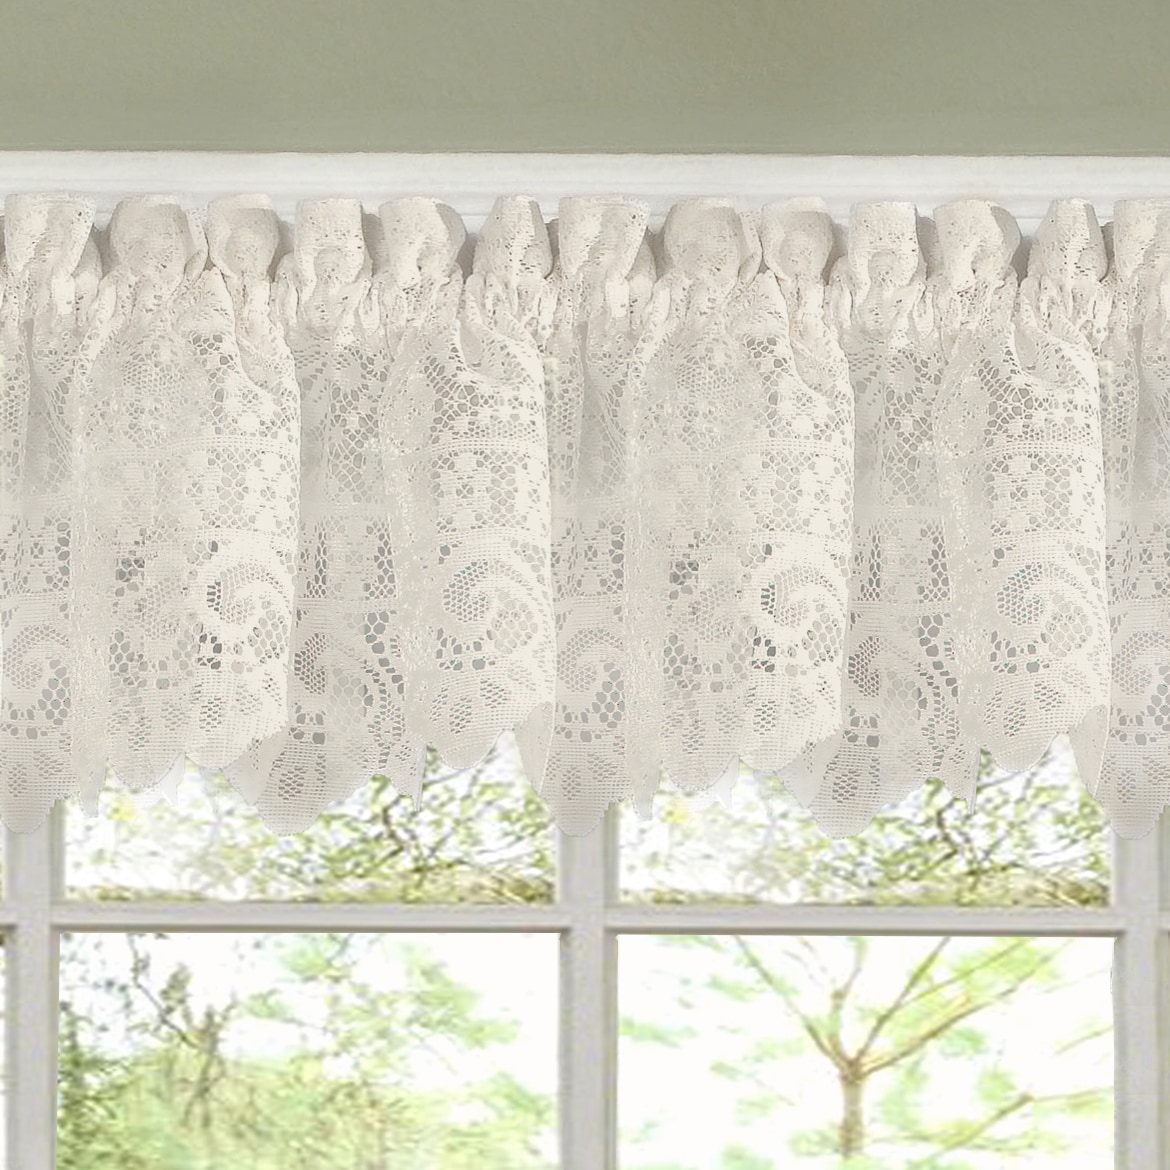 Luxurious Old World Style Lace Kitchen Curtains Tiers And Valances In Cream On Sale Overstock 10050988